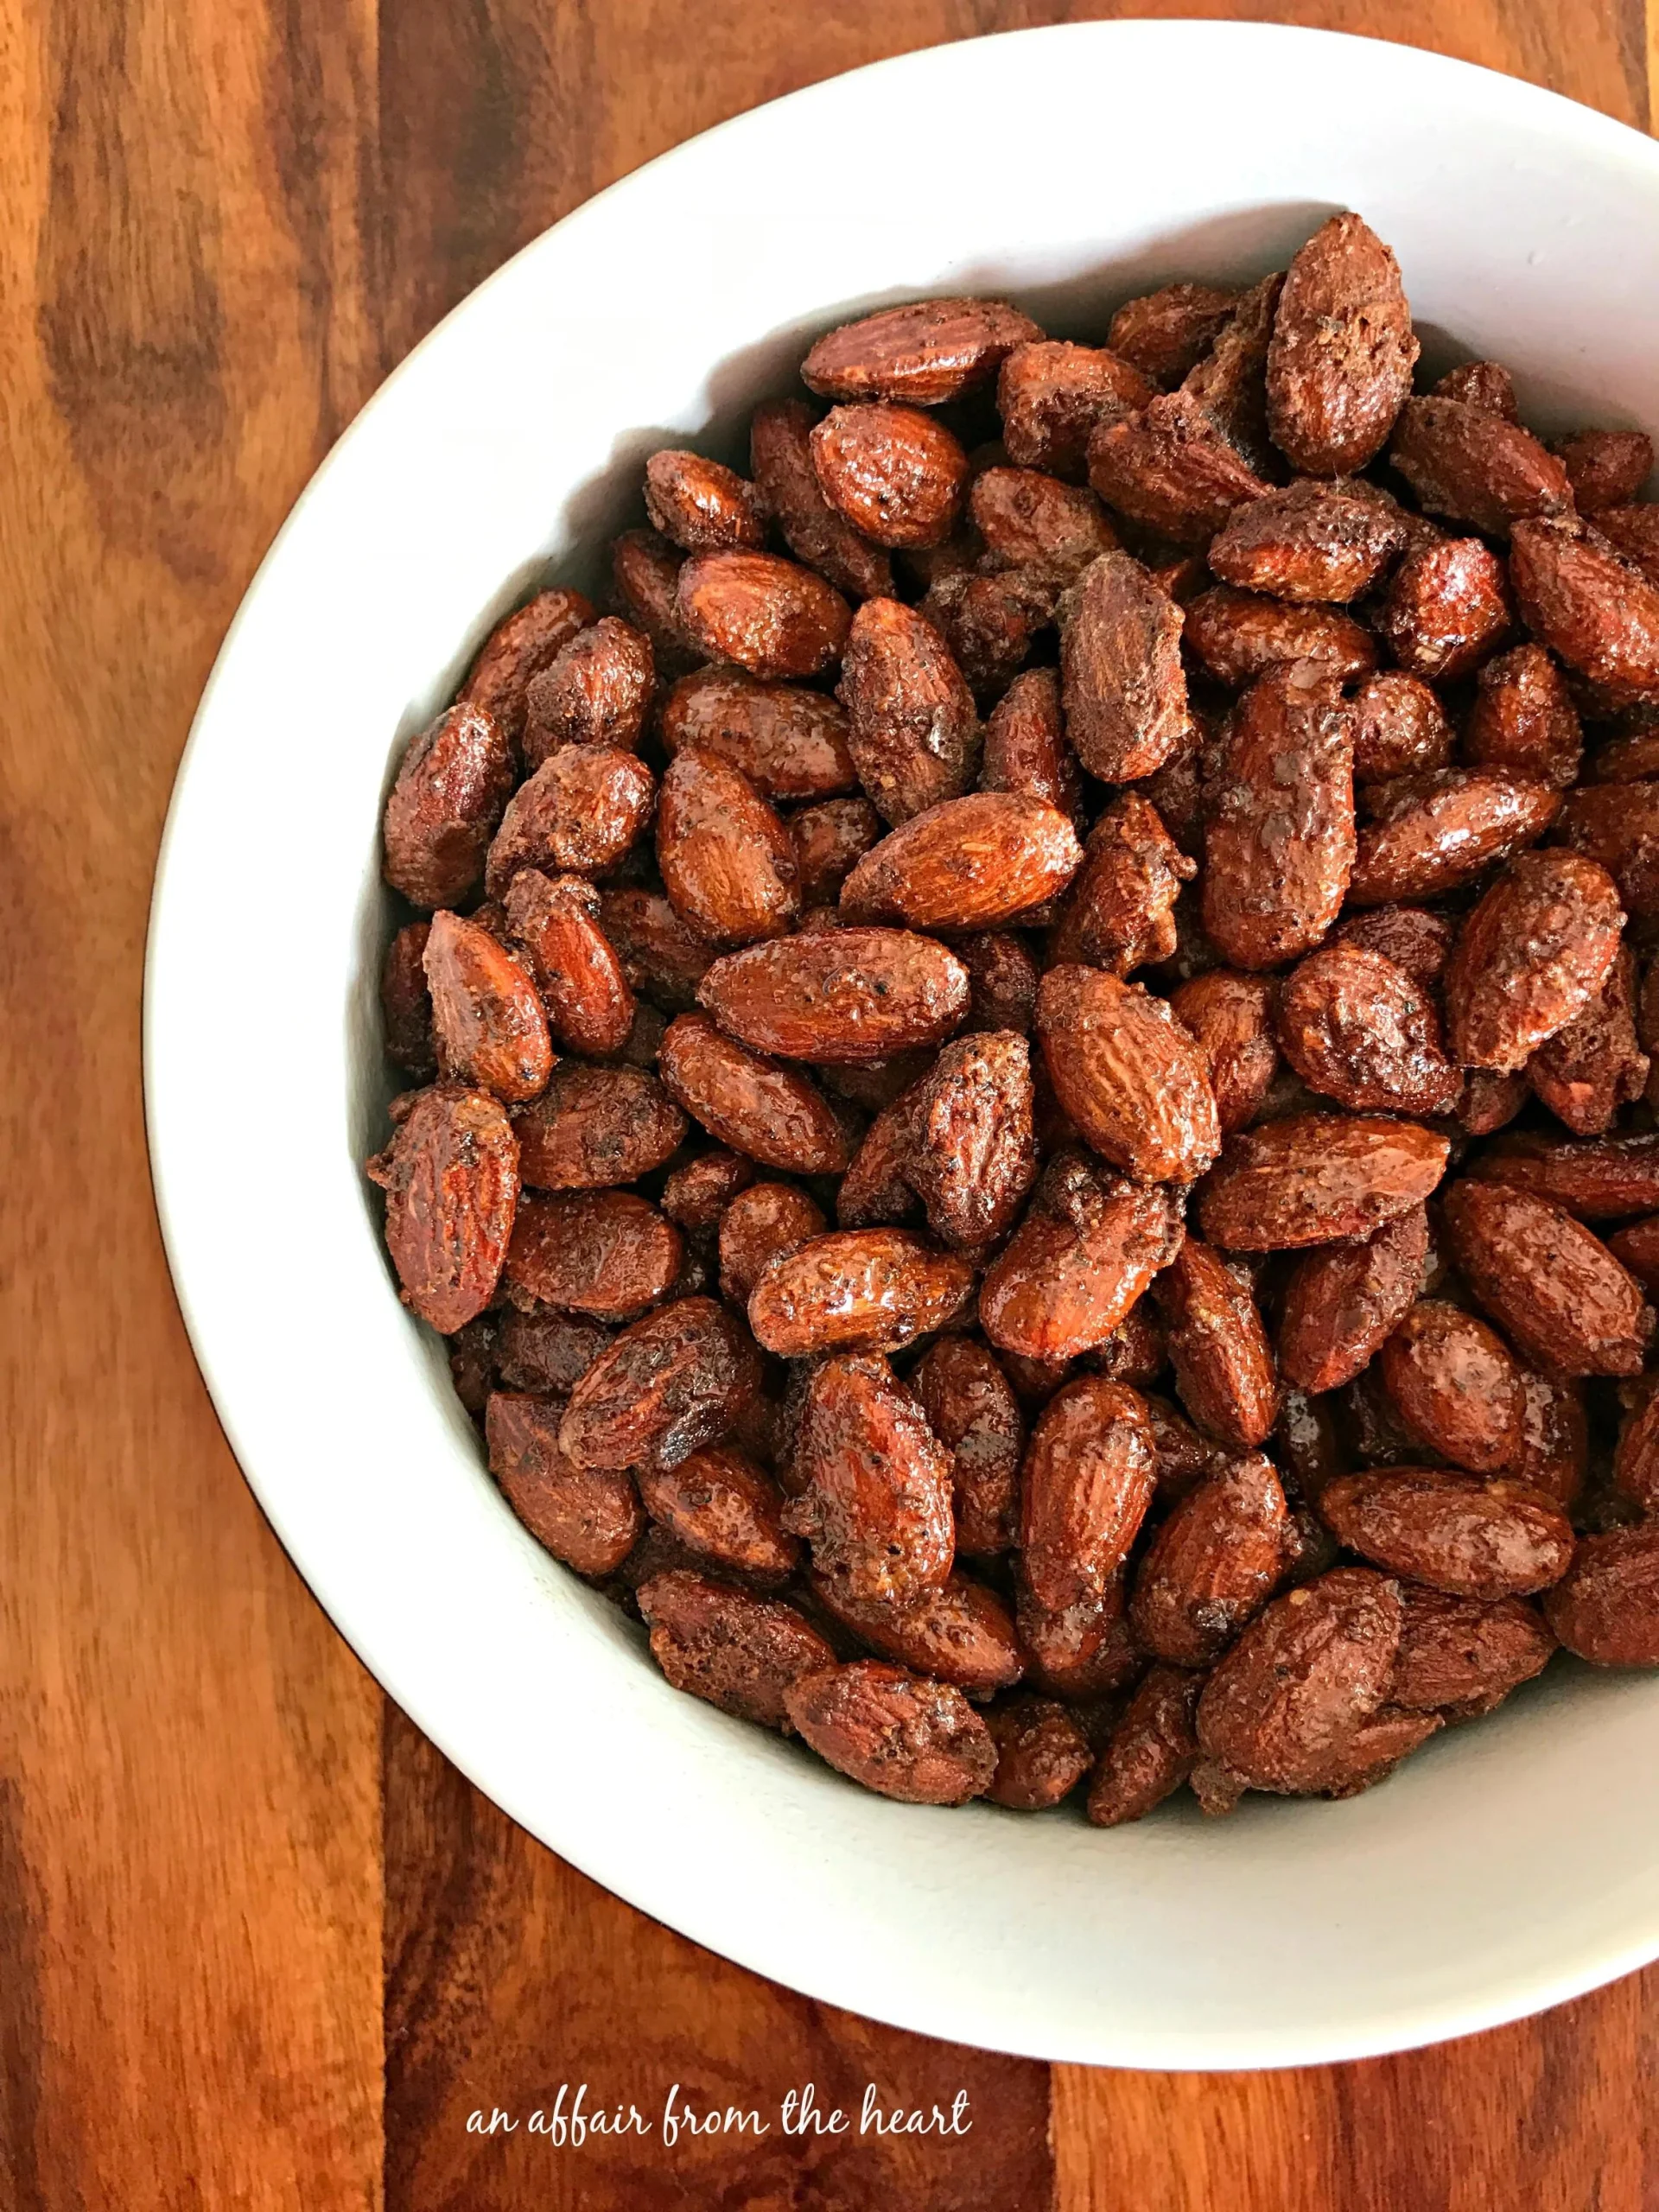 cold smoked almonds - Can you cold smoke almonds